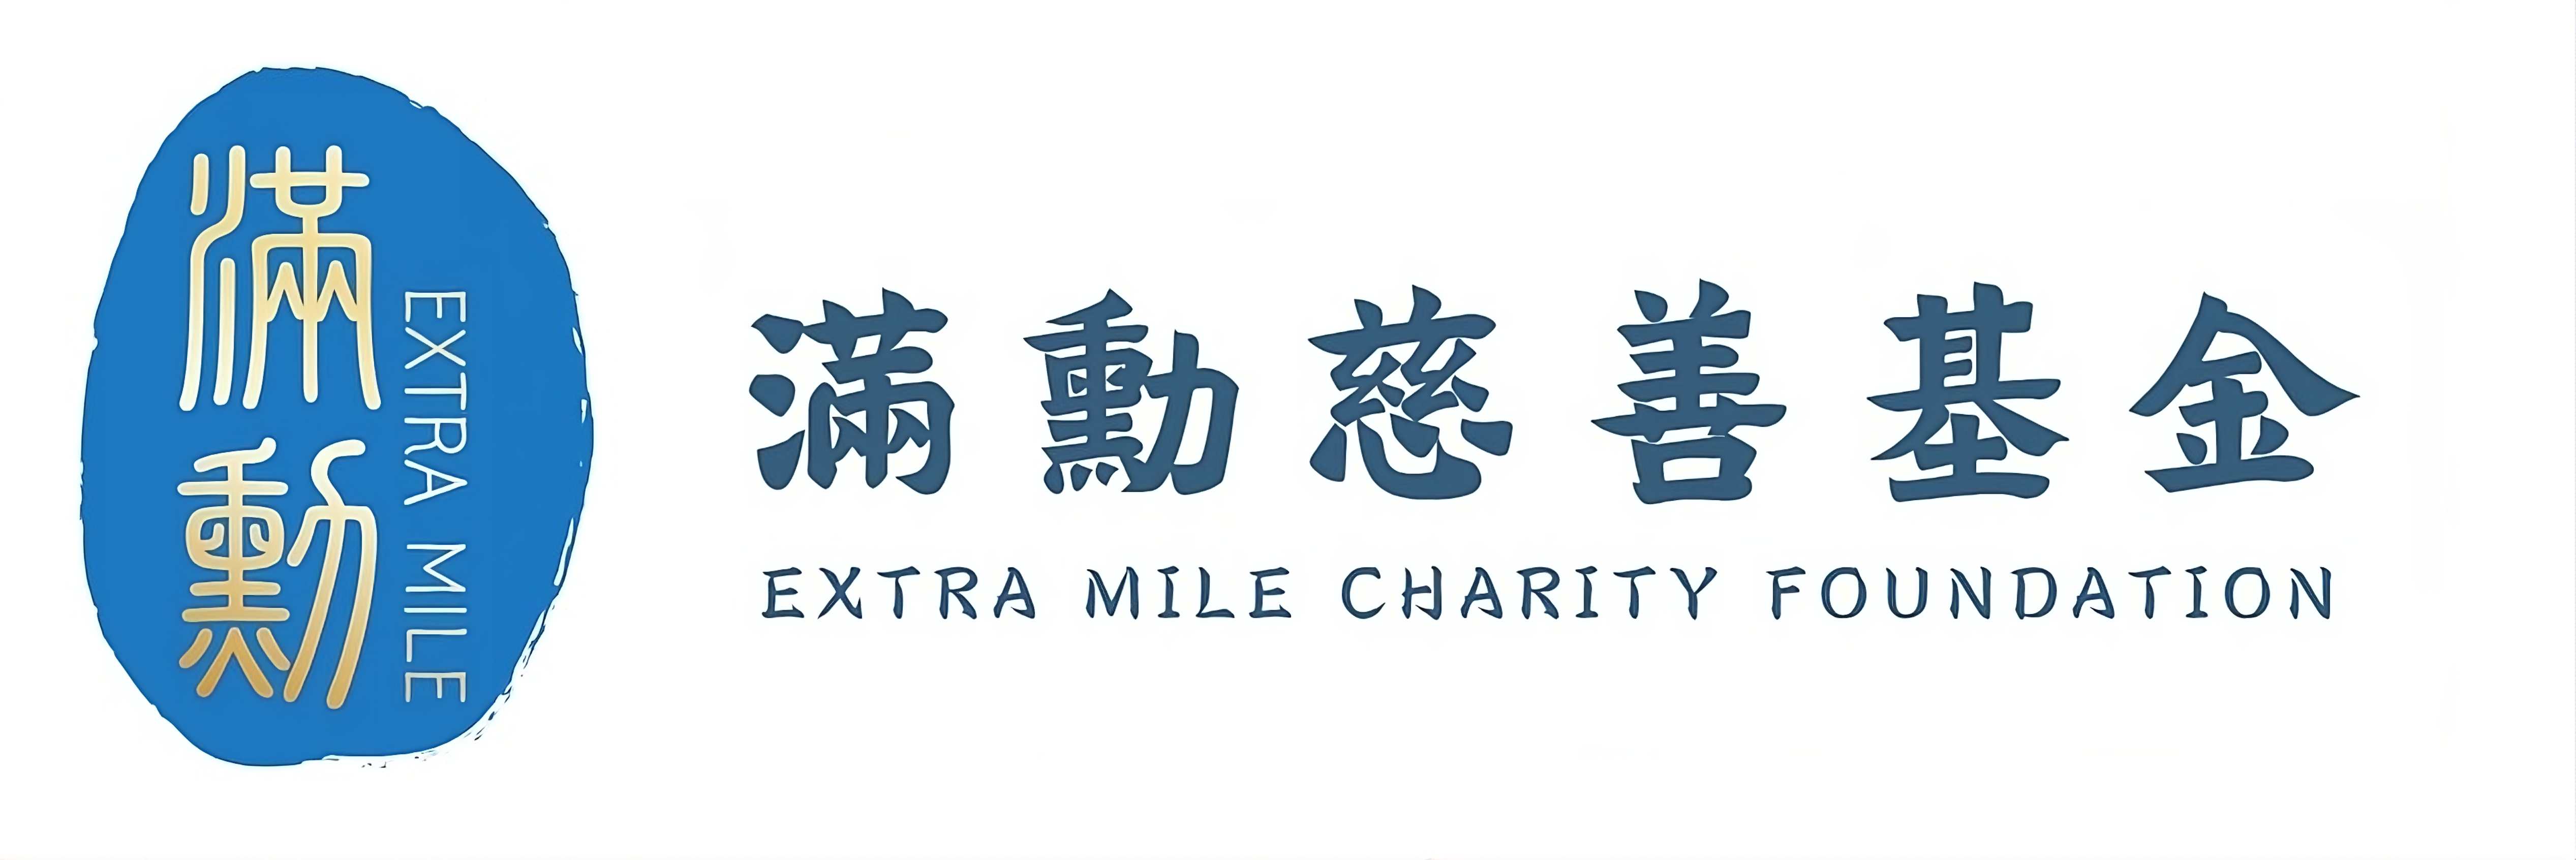 Extra Mile Charity Foundation